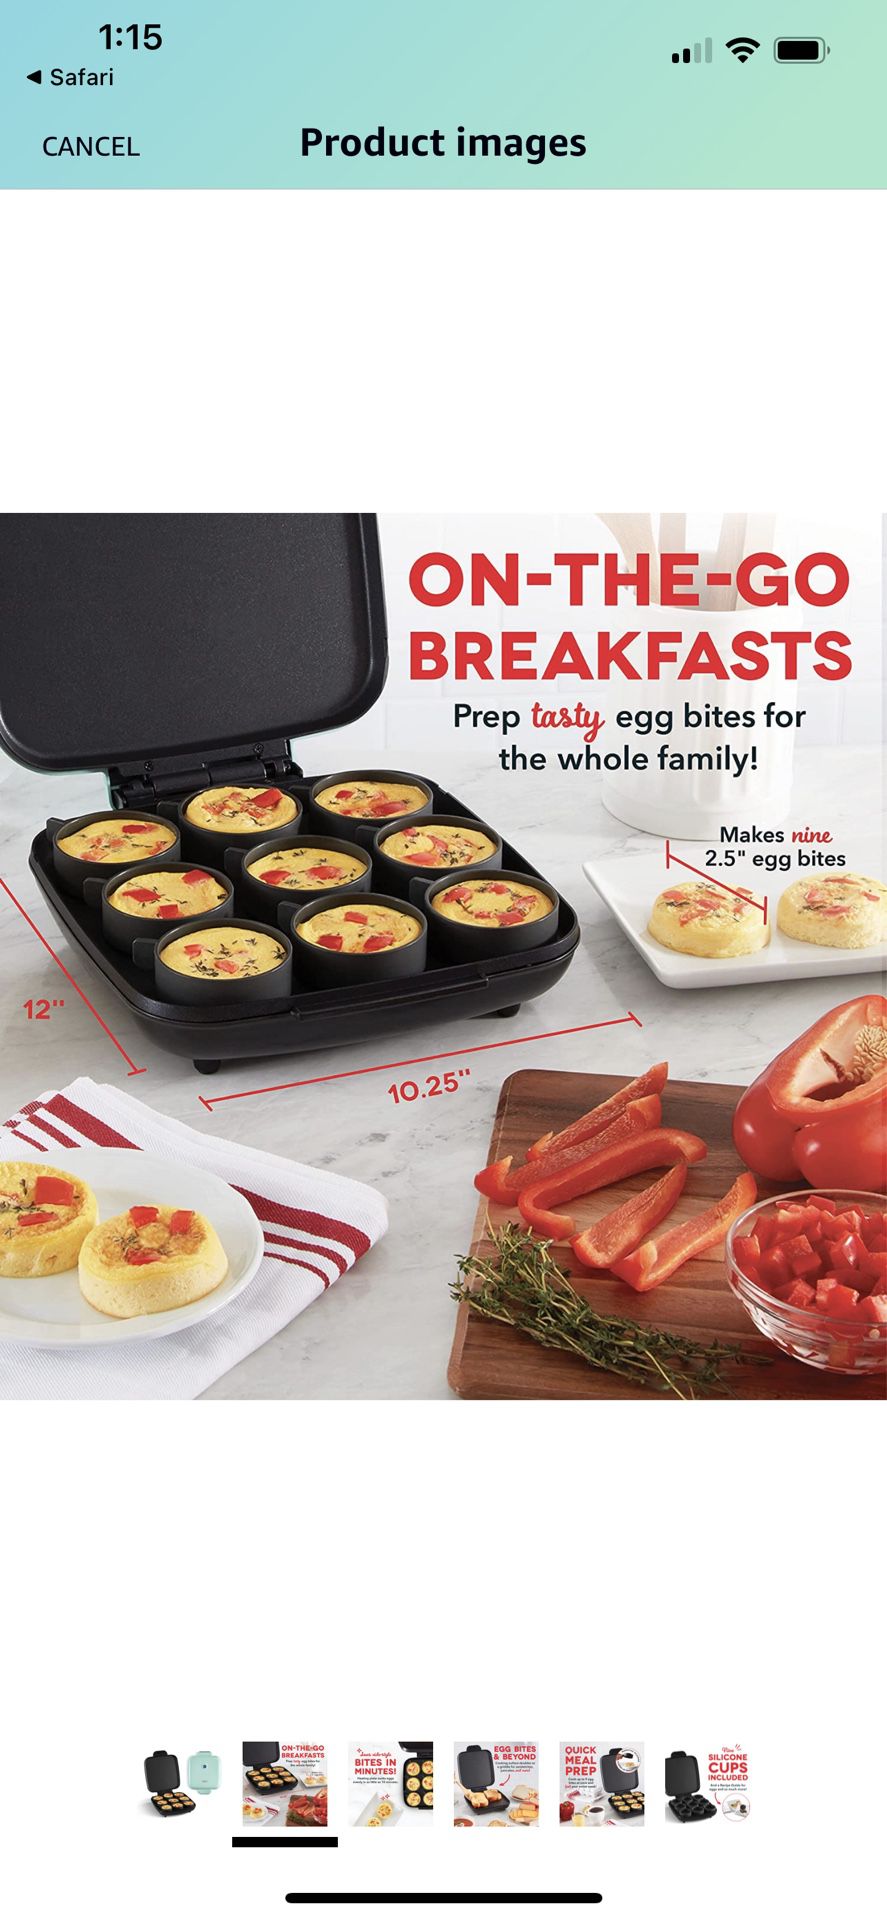 Dash® Egg Bite Maker in Red, 1 ct - Fry's Food Stores